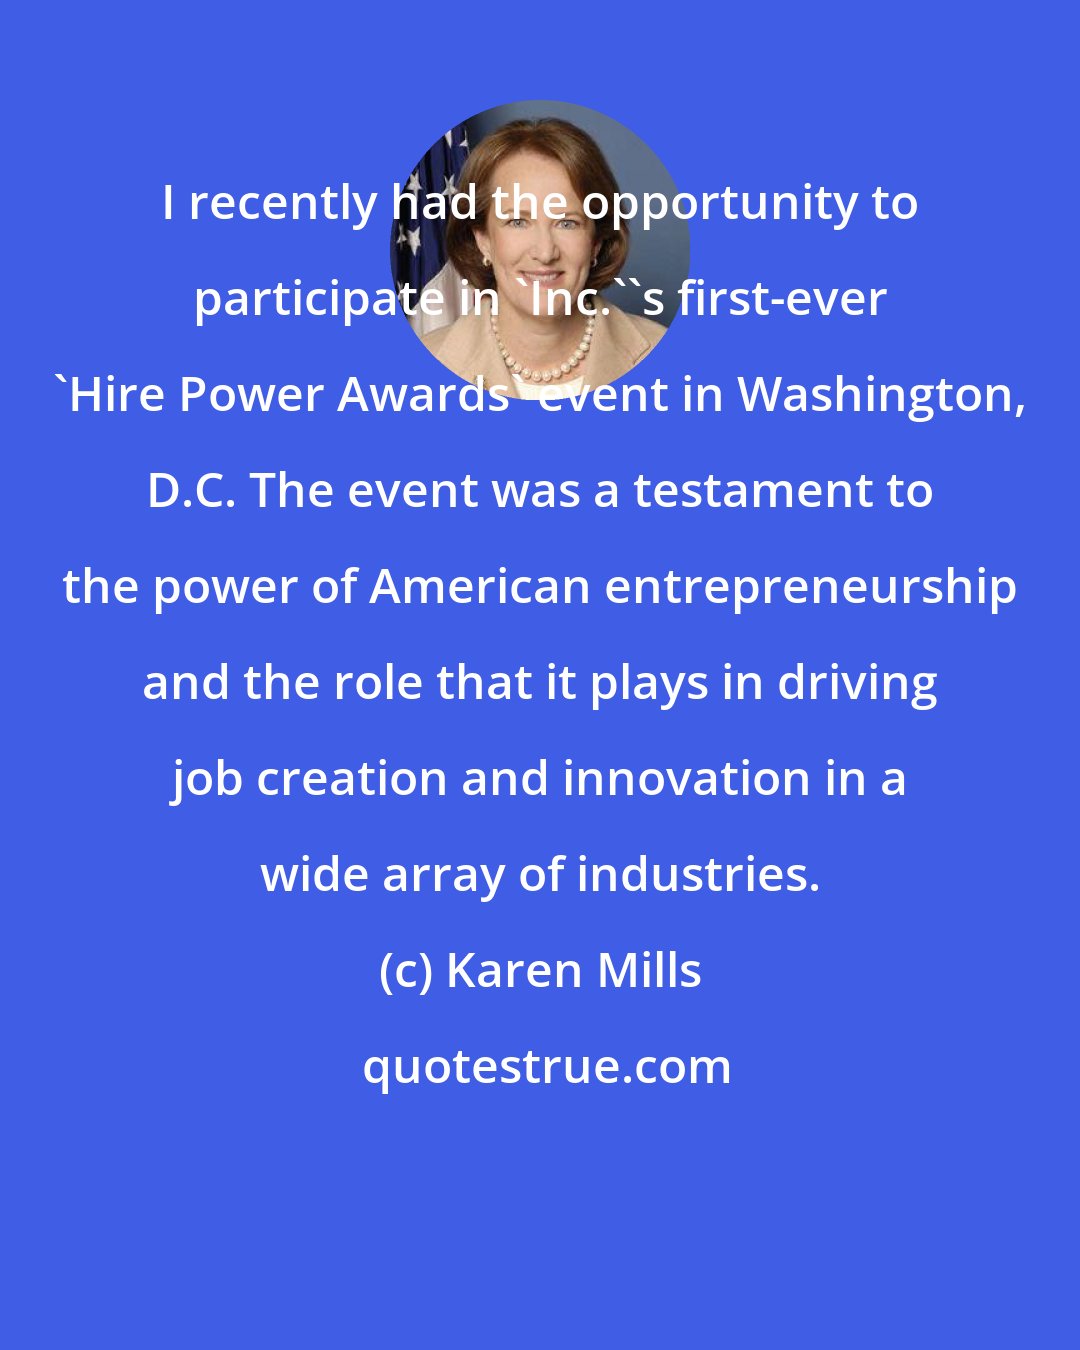 Karen Mills: I recently had the opportunity to participate in 'Inc.''s first-ever 'Hire Power Awards' event in Washington, D.C. The event was a testament to the power of American entrepreneurship and the role that it plays in driving job creation and innovation in a wide array of industries.